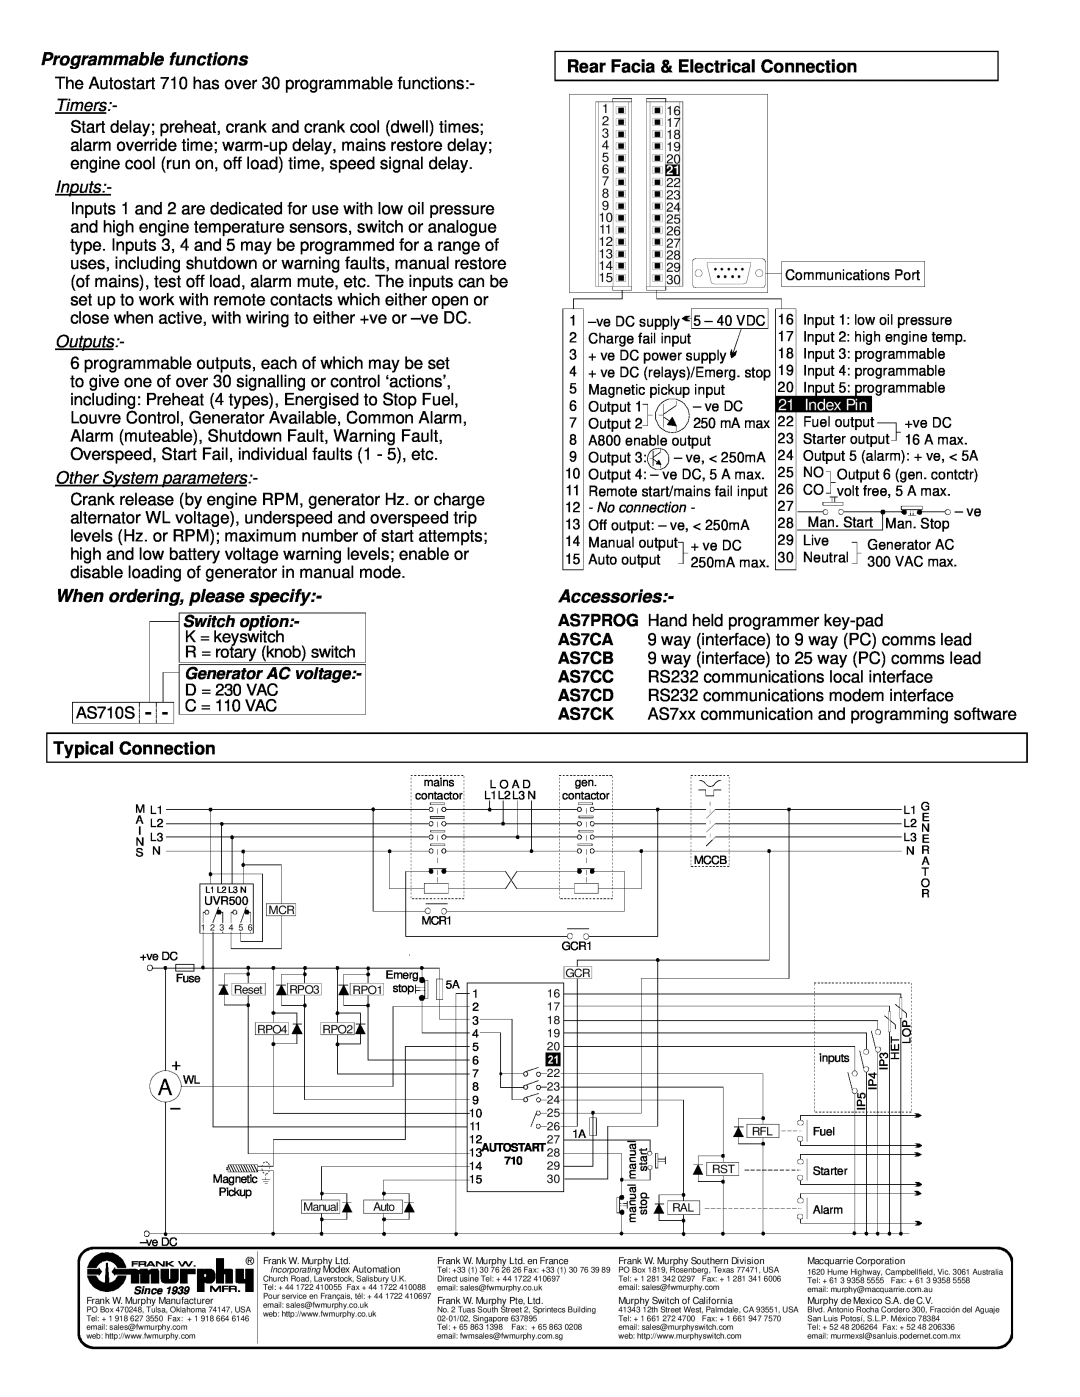 Murphy AS710S Programmable functions, Rear Facia & Electrical Connection, Timers, Inputs, Outputs, Other System parameters 